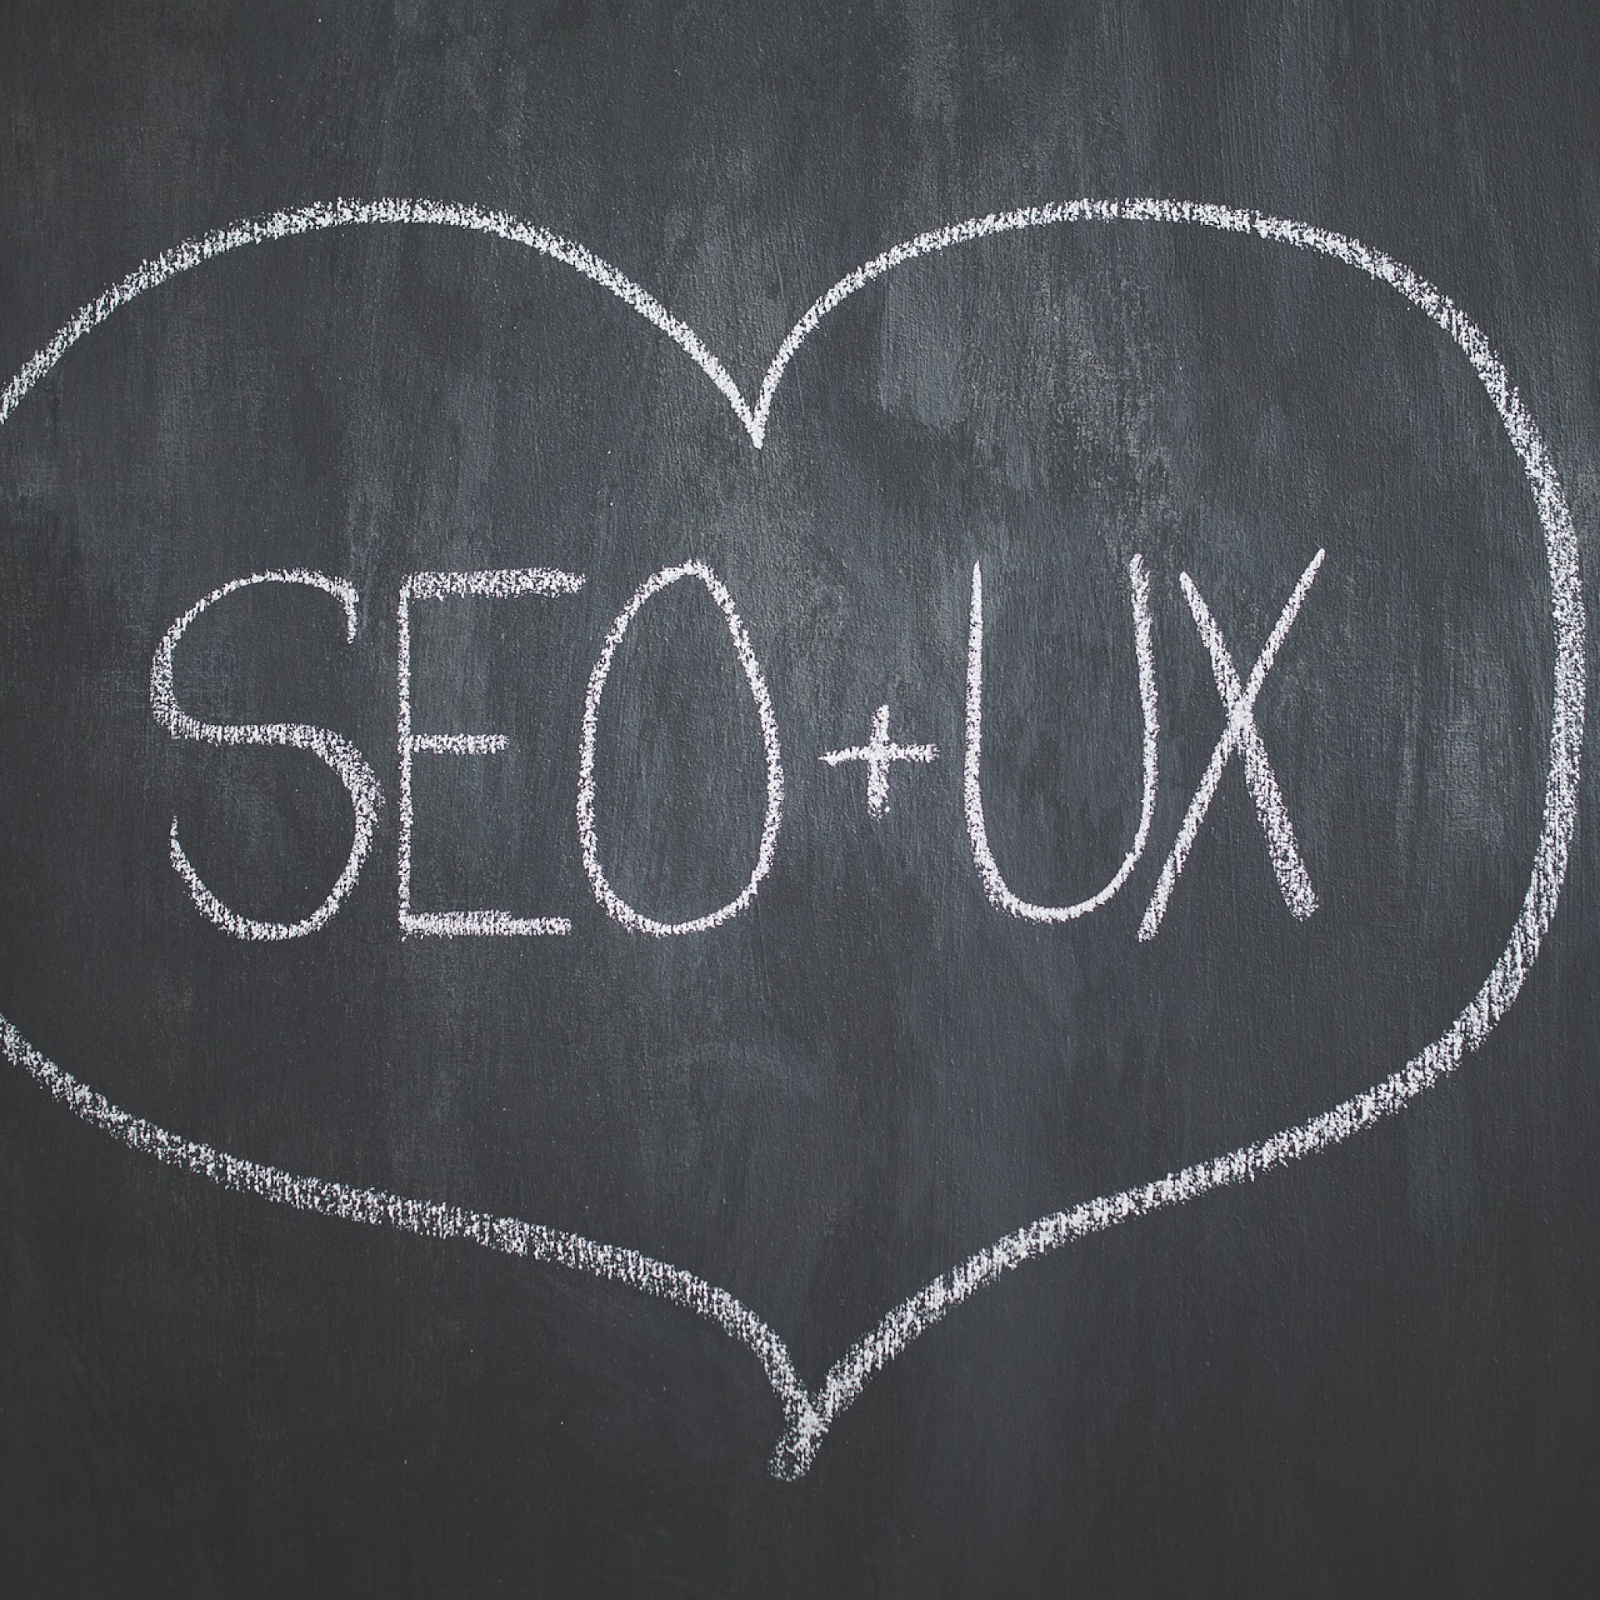 SEO and UX (user experience)